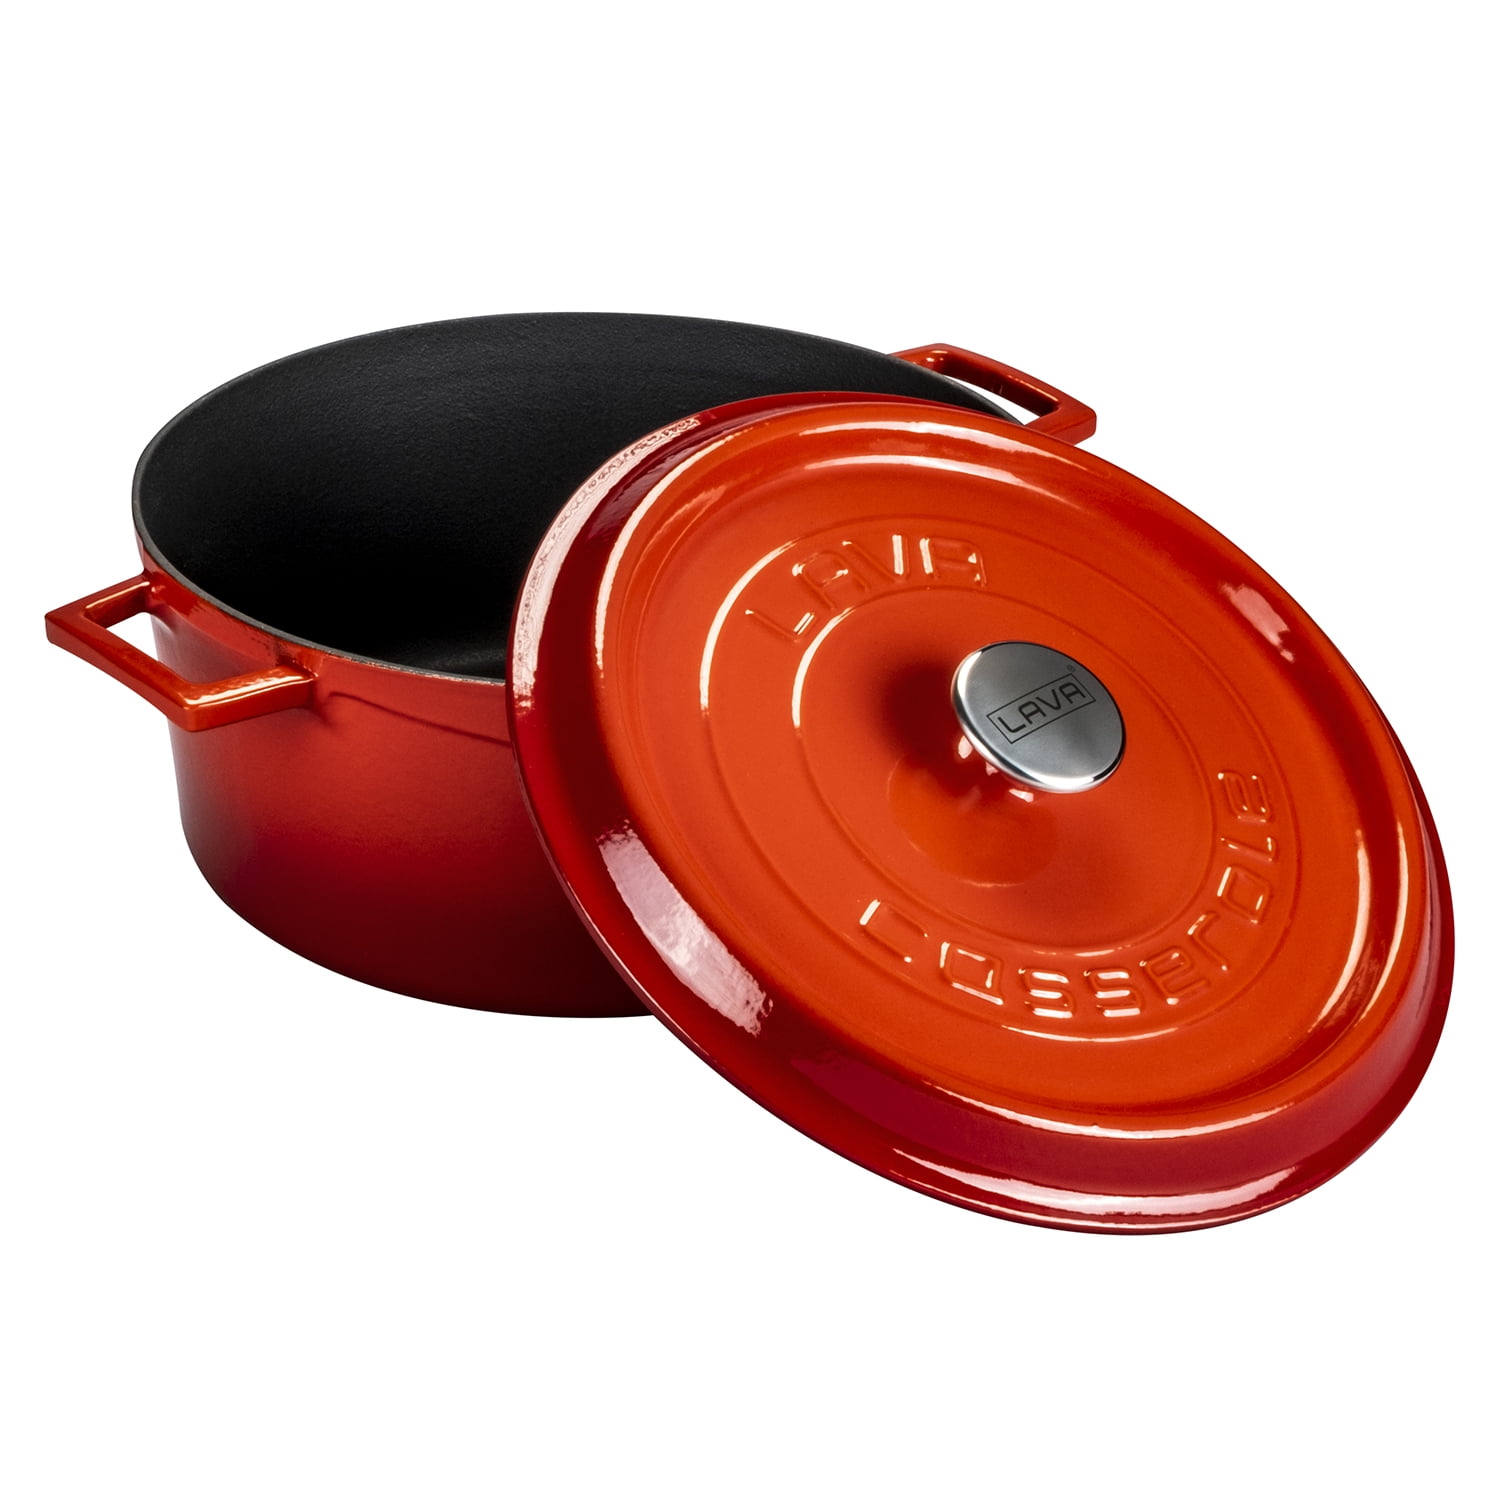 Lava Cast Iron Lava Enameled Cast Iron Skillet 11 inch-Edition Series Color: Red LV Y TV 28 EDT R